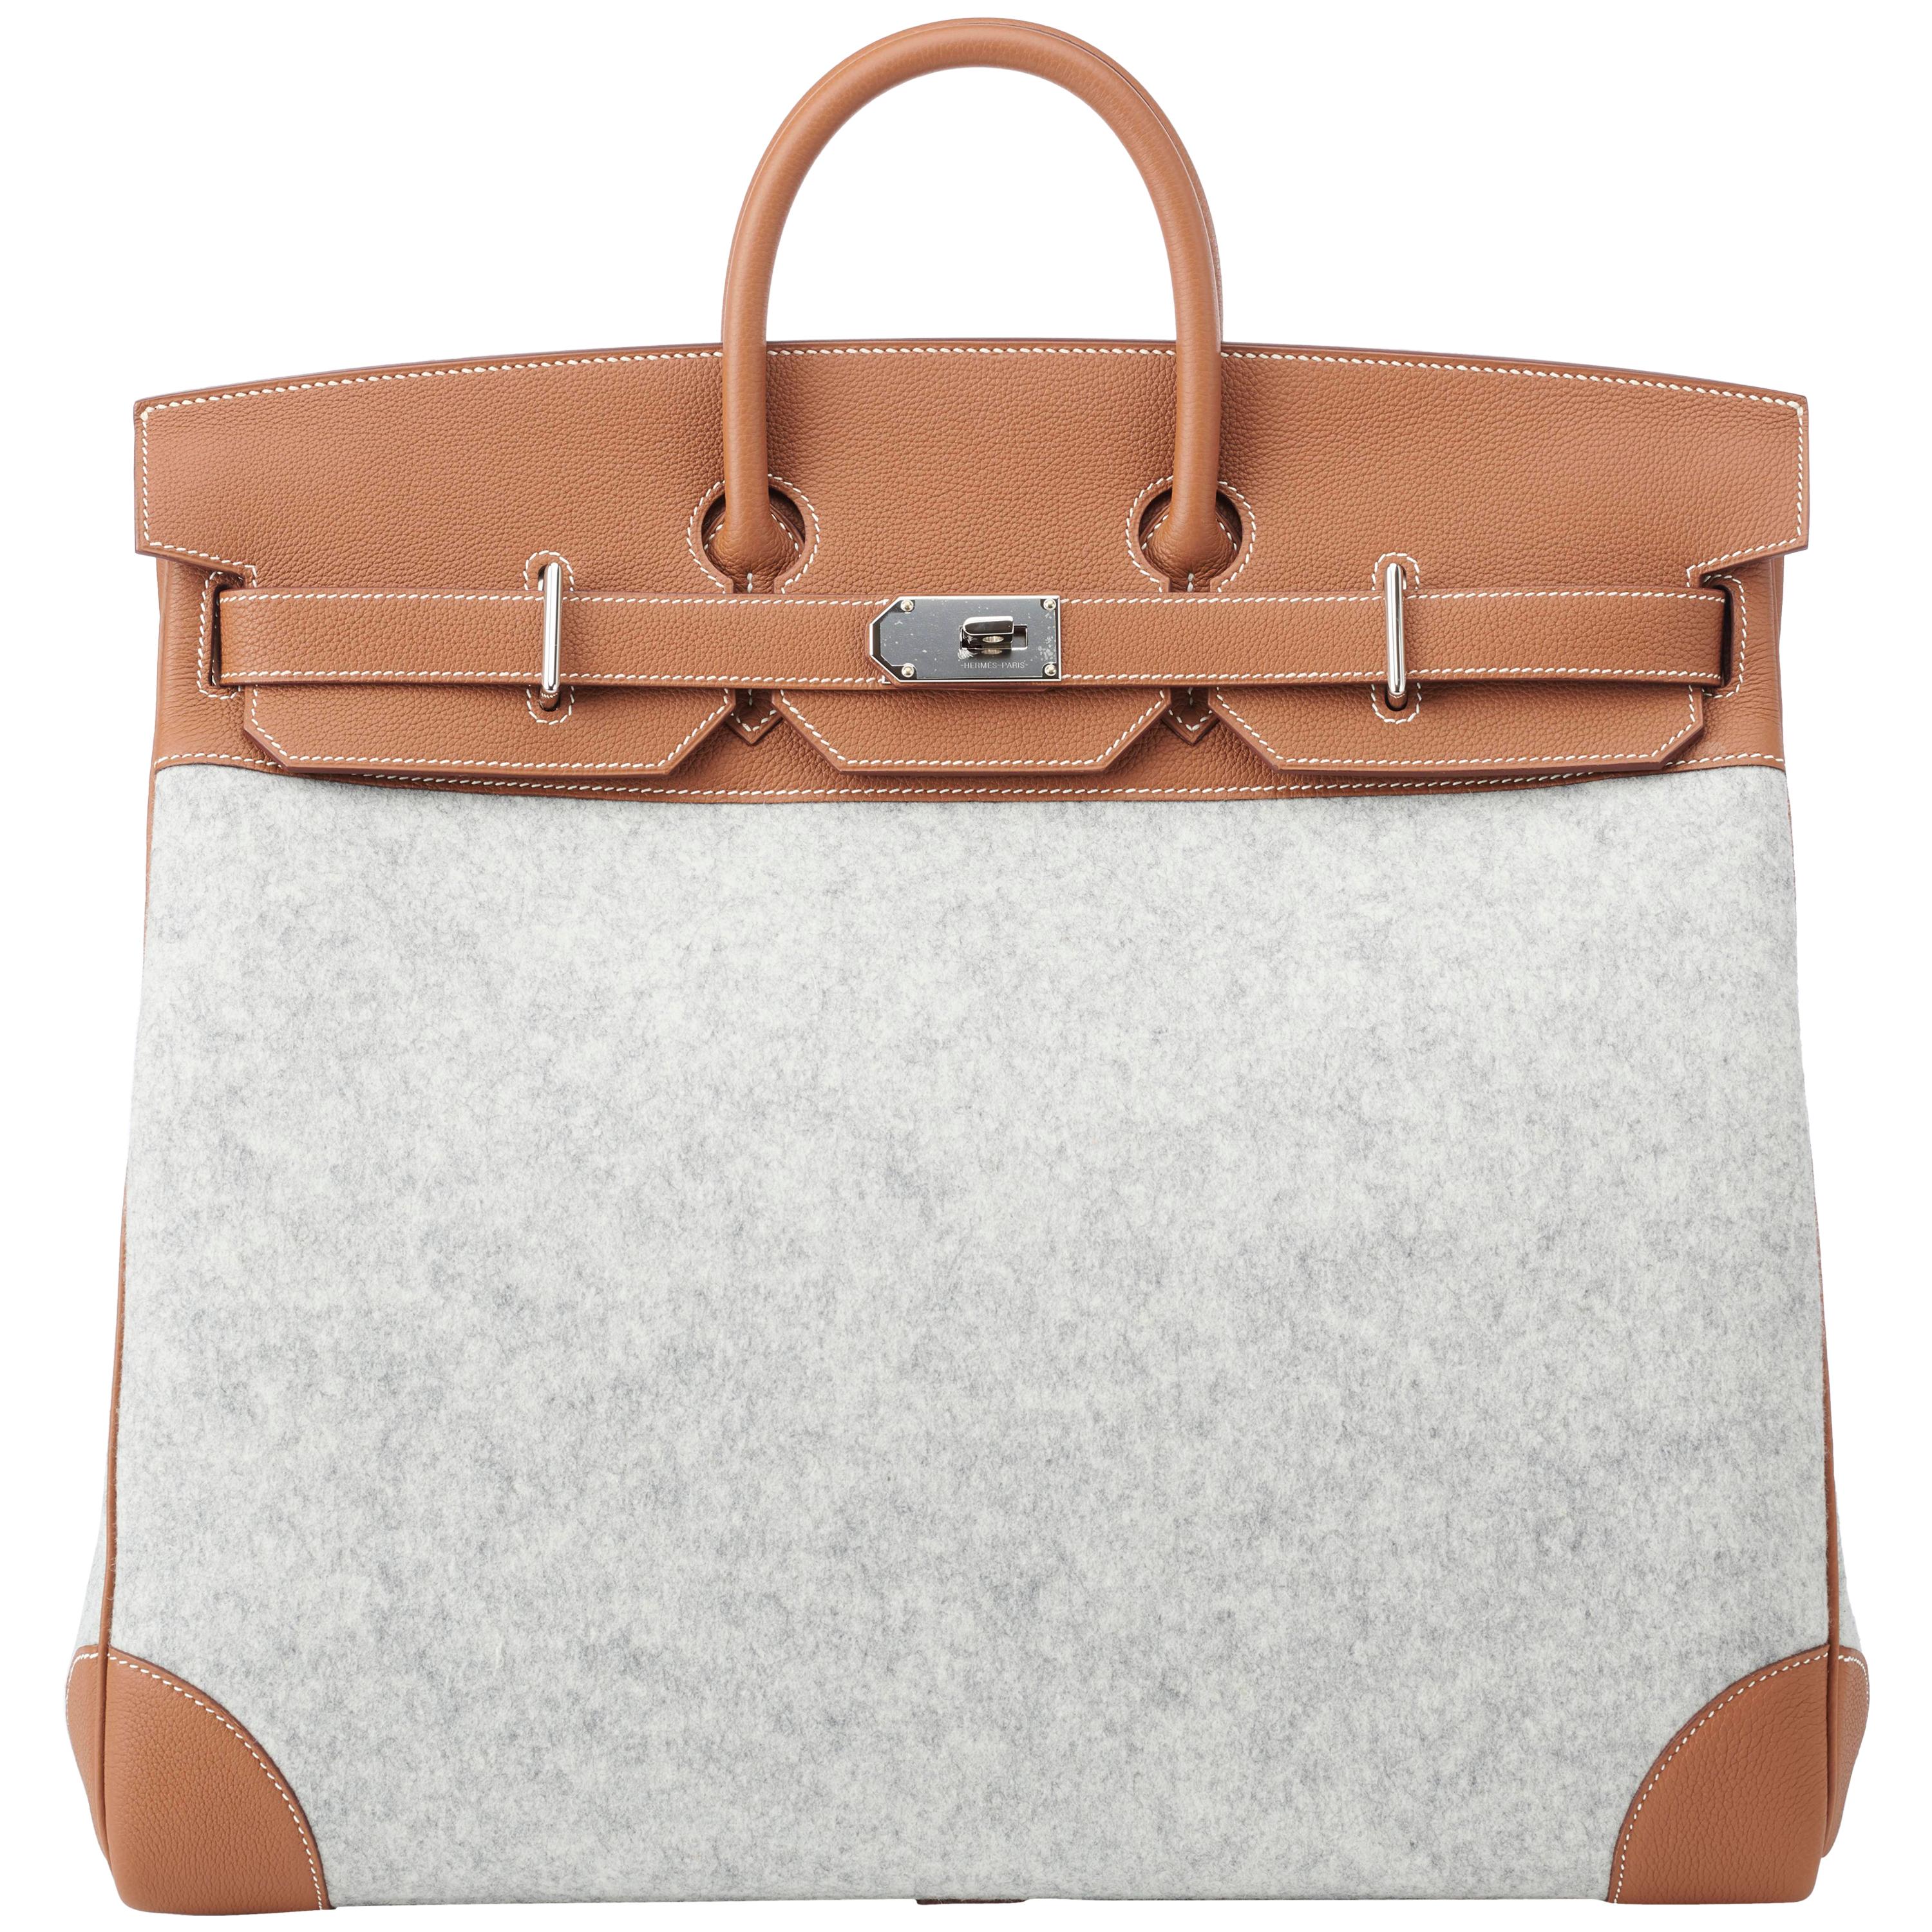 Hermes Birkin HAC 50cm TODOO in Gold Togo leather and Gris Clair Wool Felt